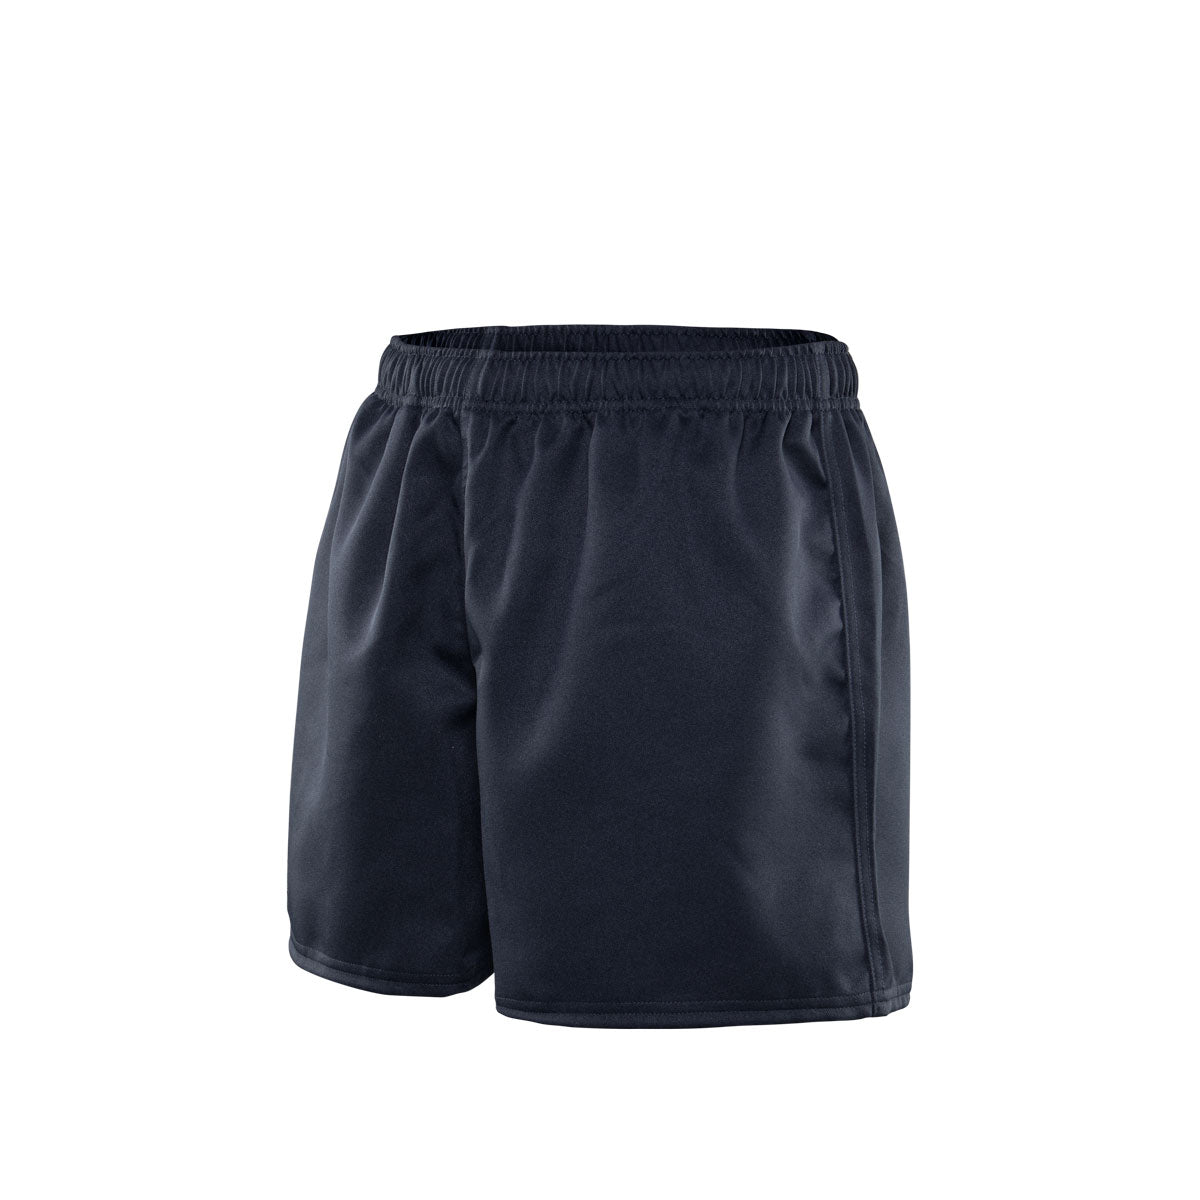 DS Adult Navy Rugby Short